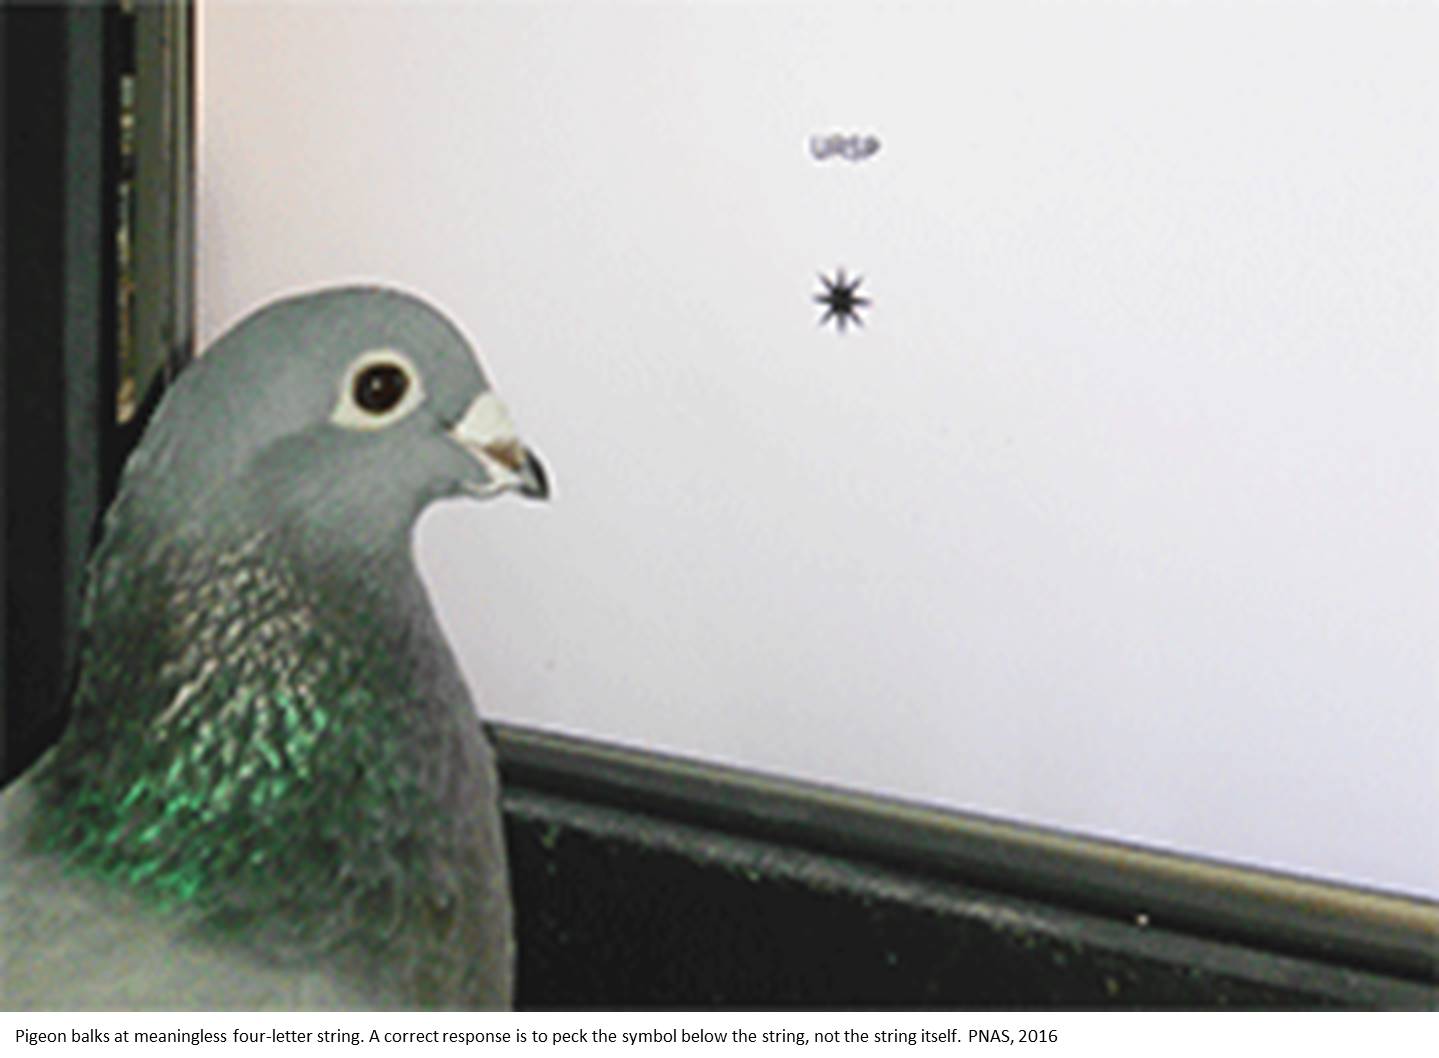 Trained pigeons can recognize words